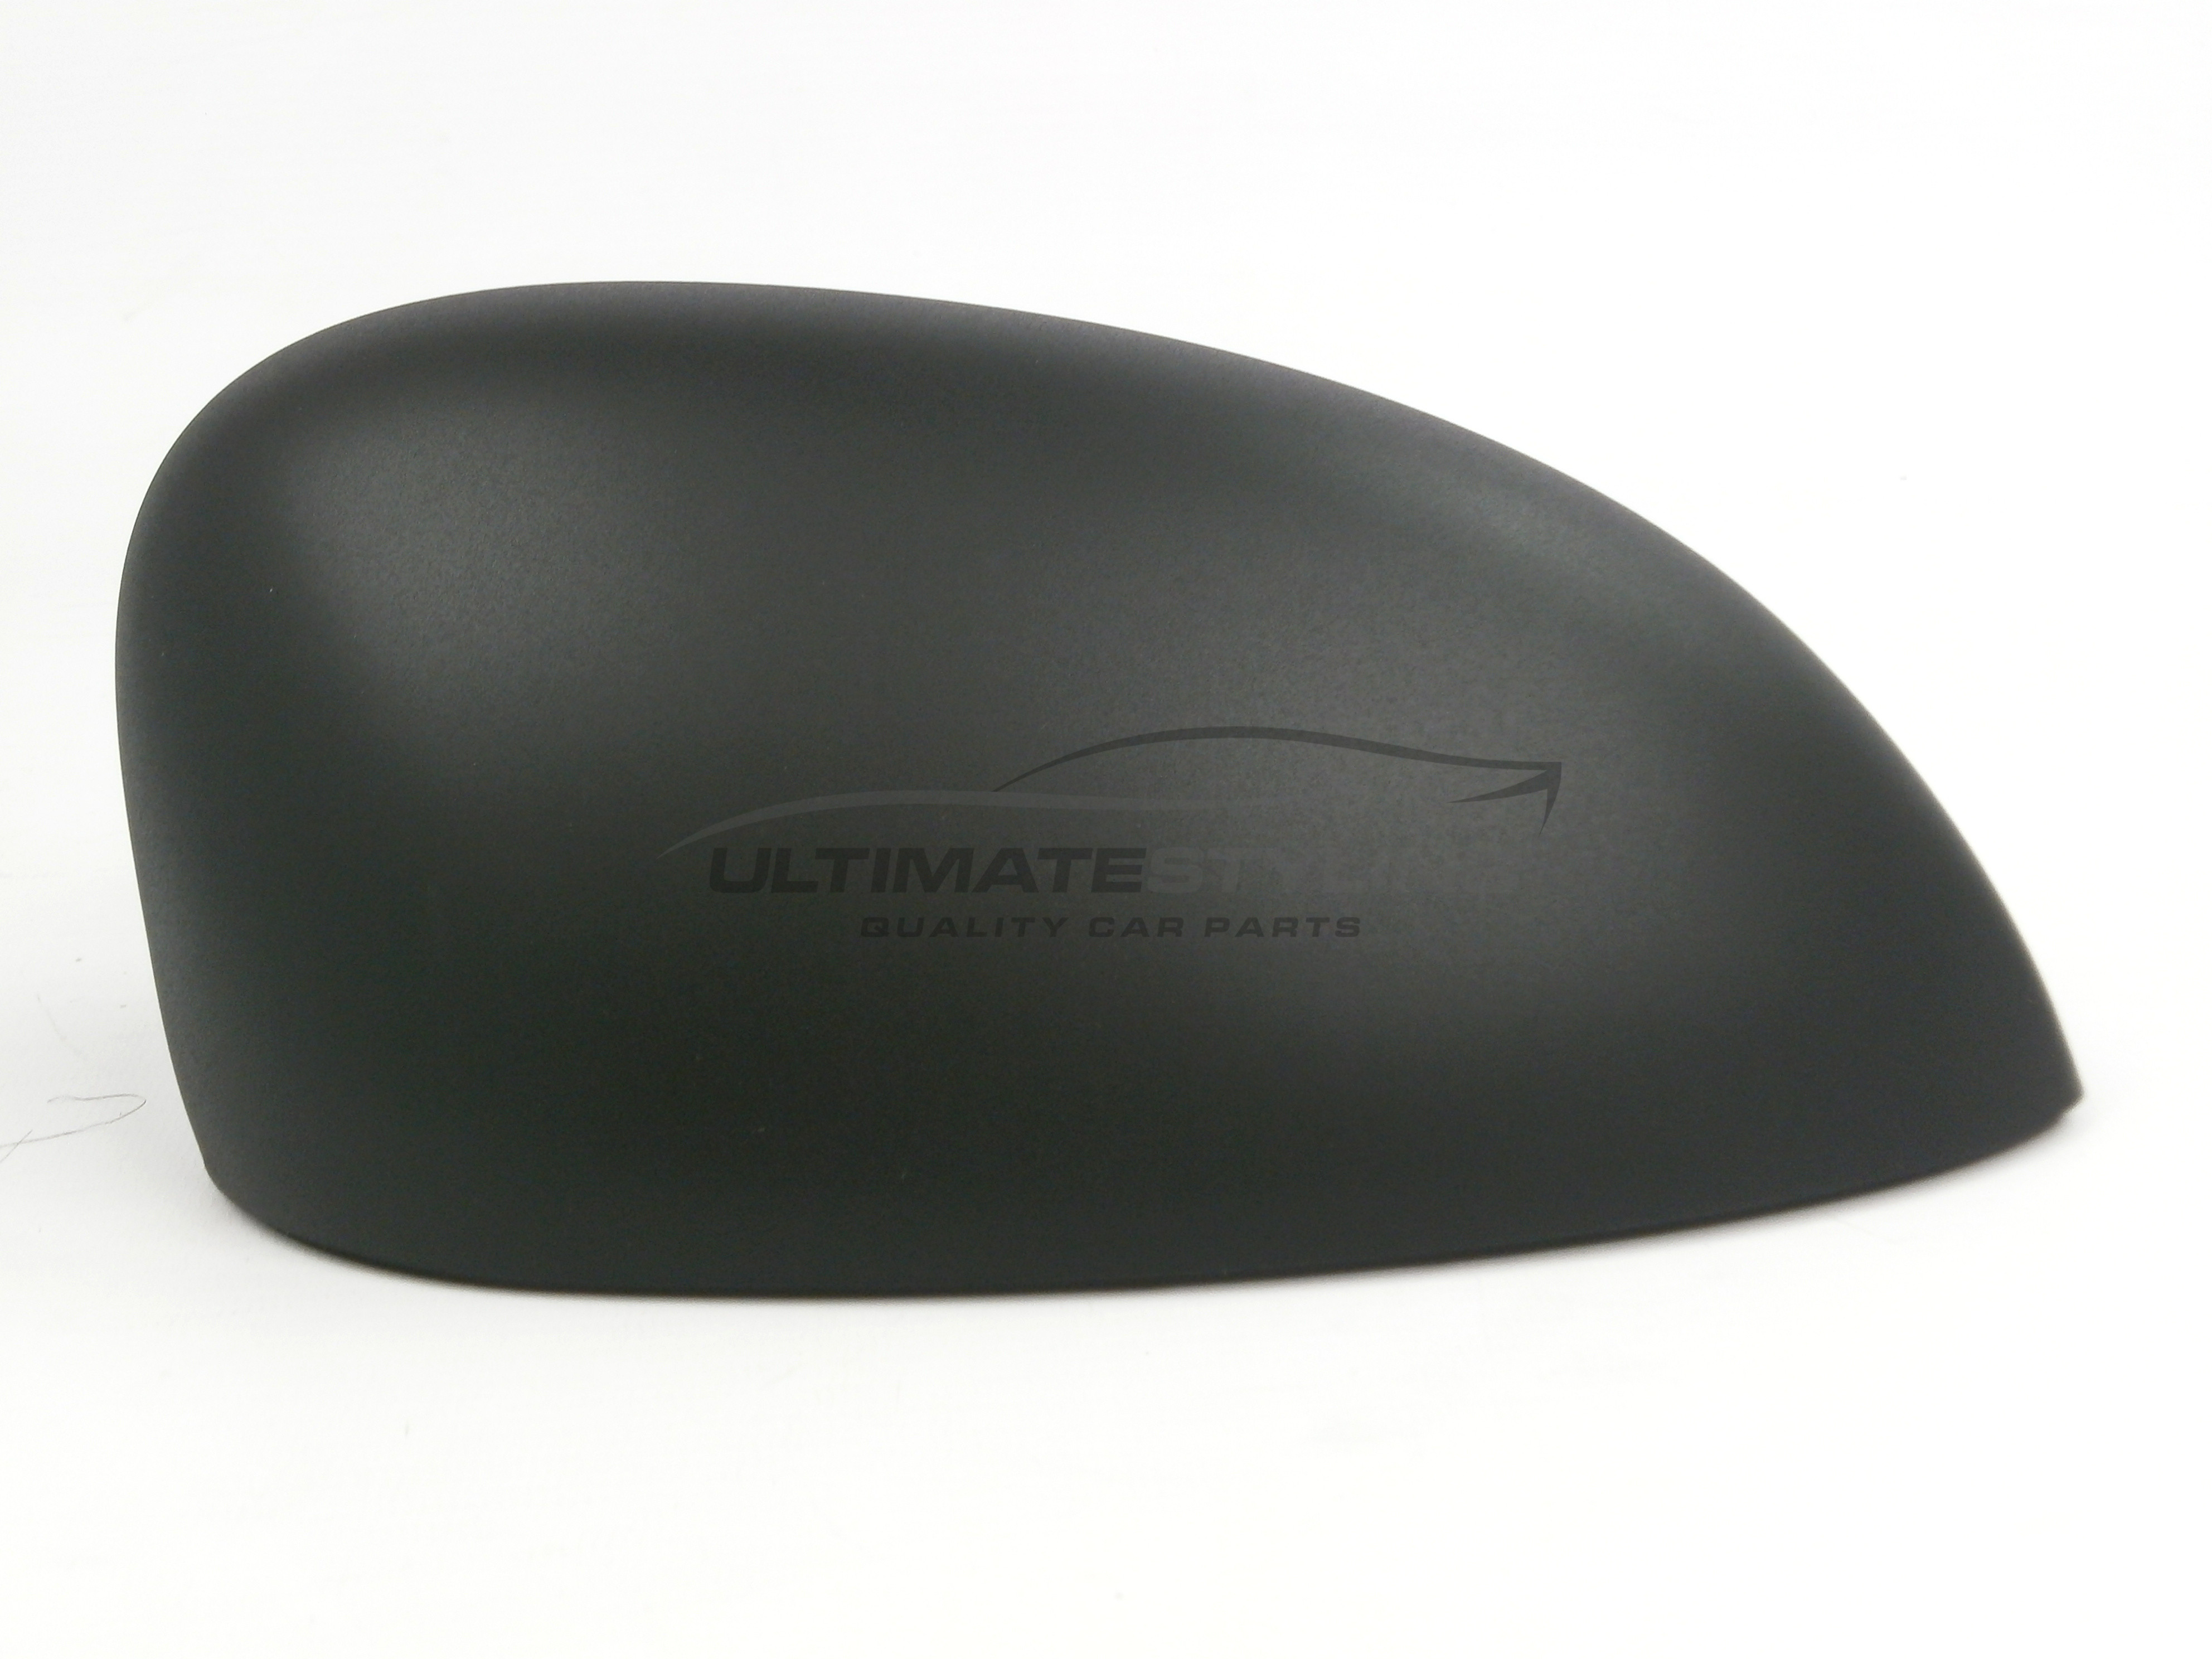 https://ultimatestyling.co.uk/storage/product-images/MC2576/fiat-500-2008-wing-mirror-cover-cap-casing-black-textured-drivers-side-rh-2.jpg